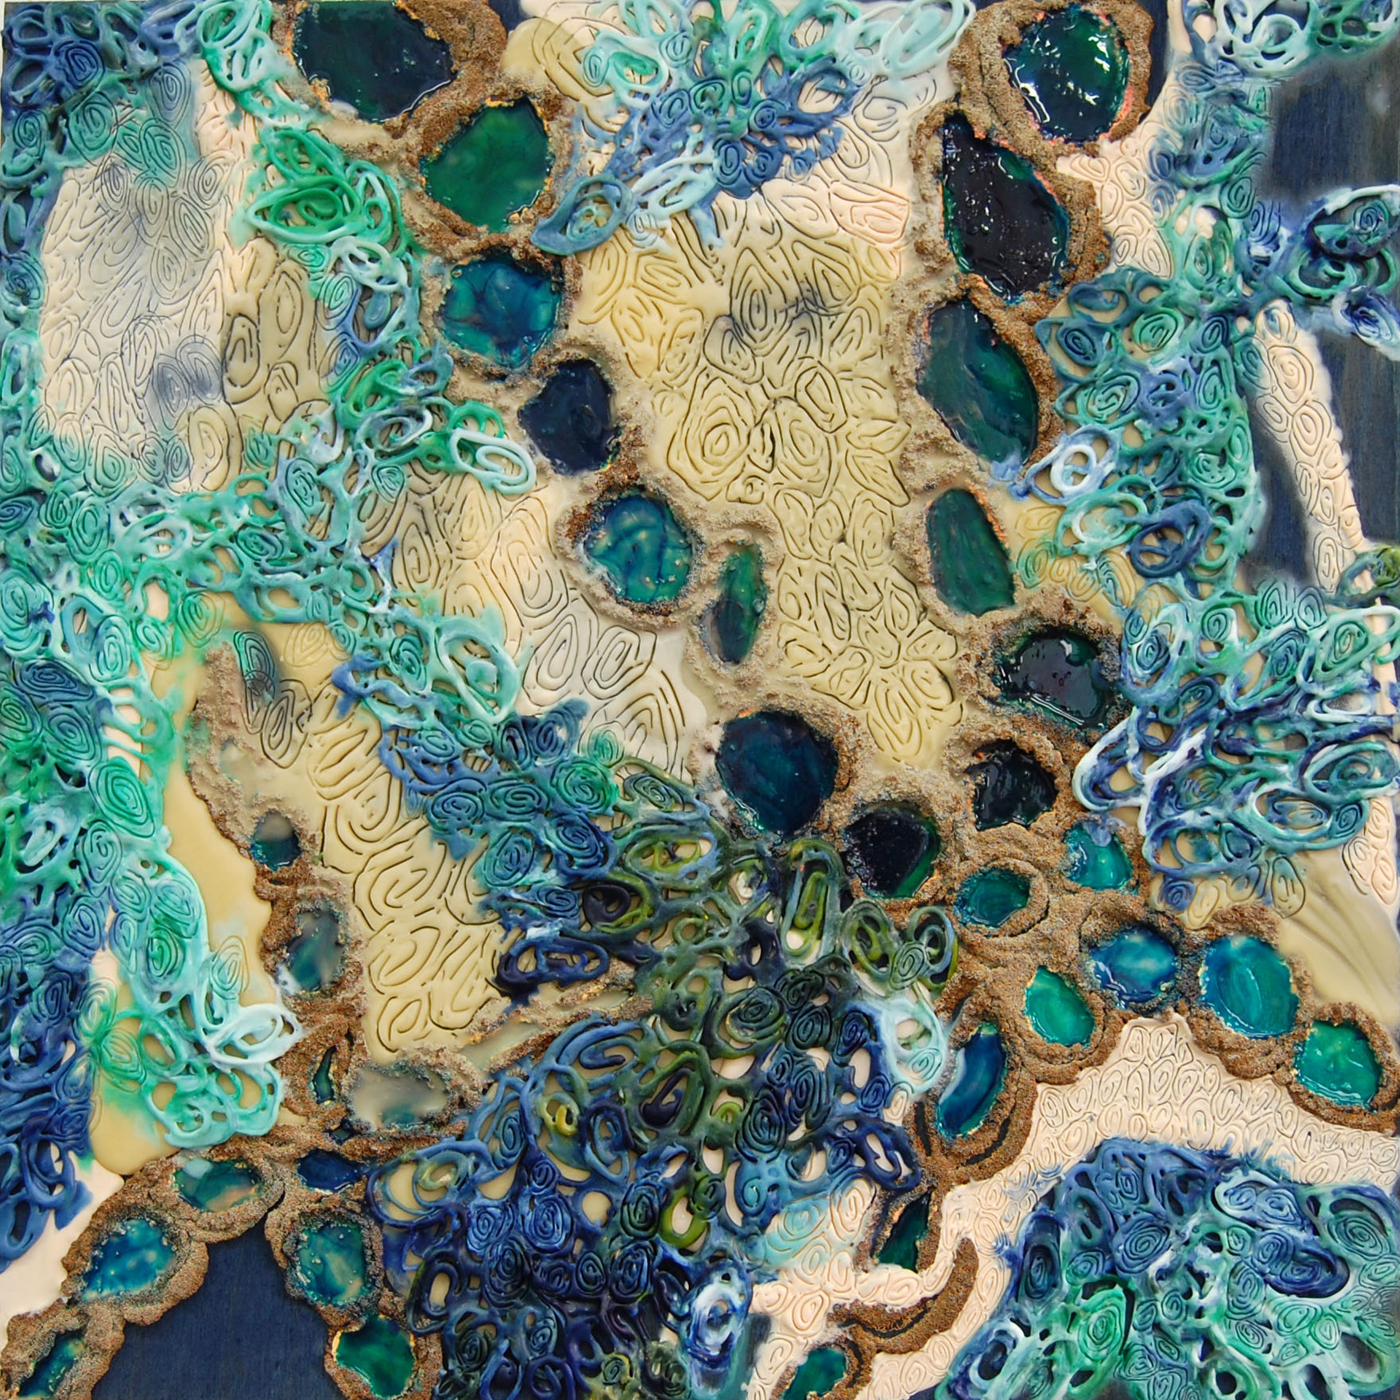 Sea Cells IV, 2011, encaustic, glass beads, and urethane on panel